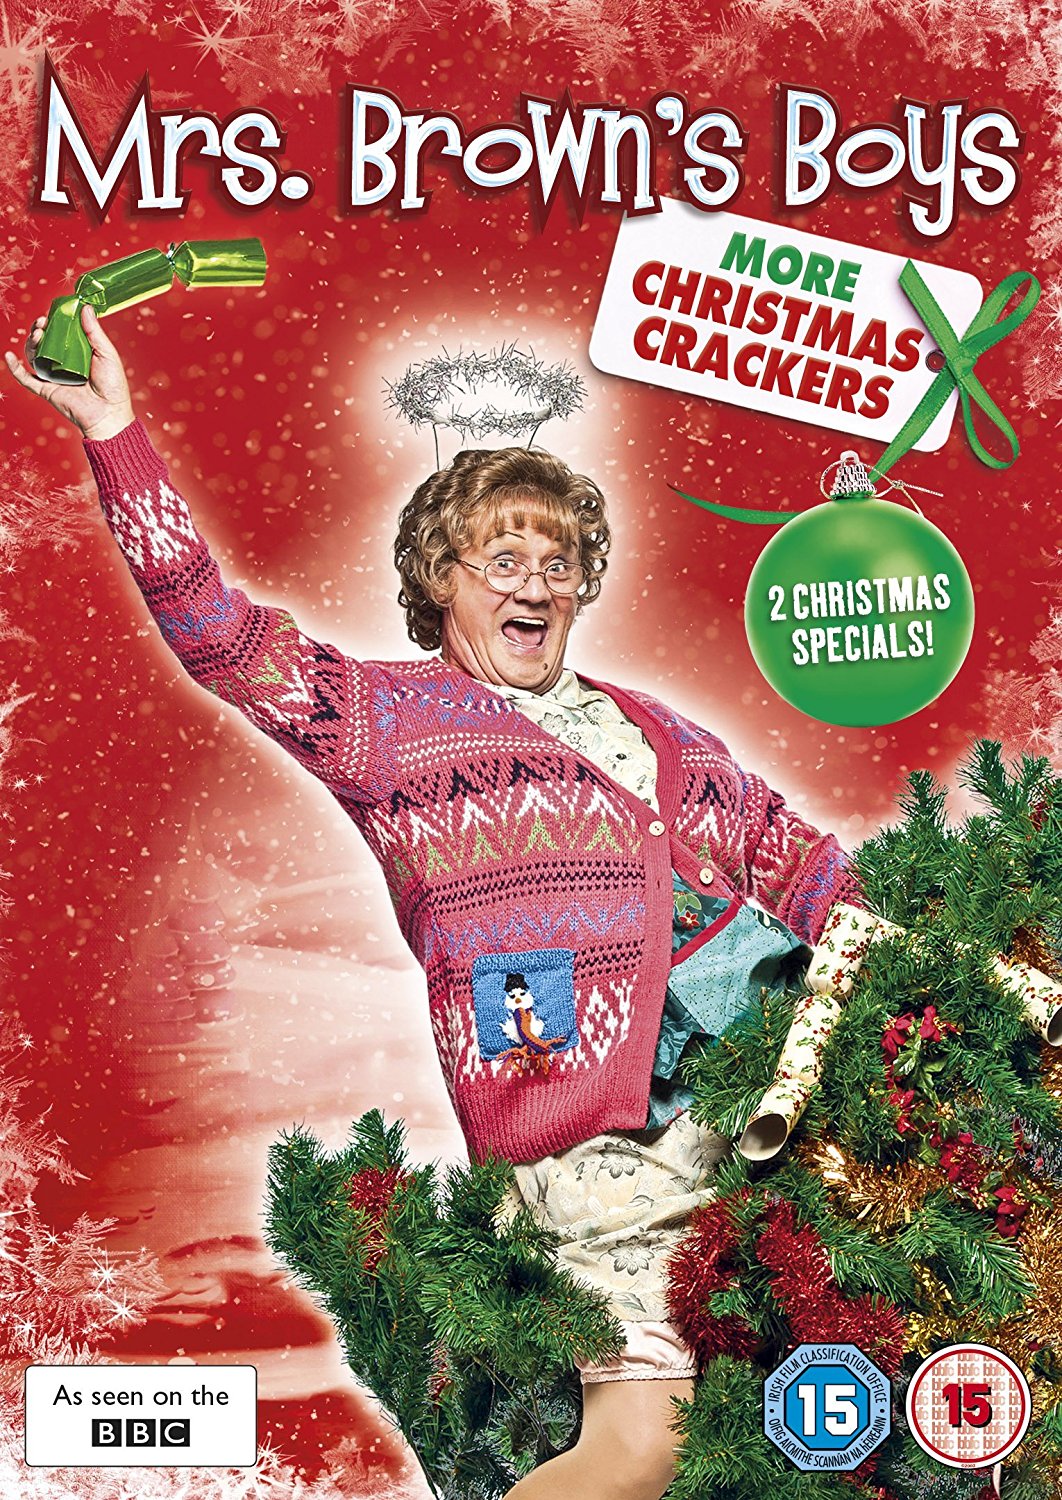 Mrs Brown's Boys Christmas Special 2014 Backgrounds, Compatible - PC, Mobile, Gadgets| 1062x1500 px